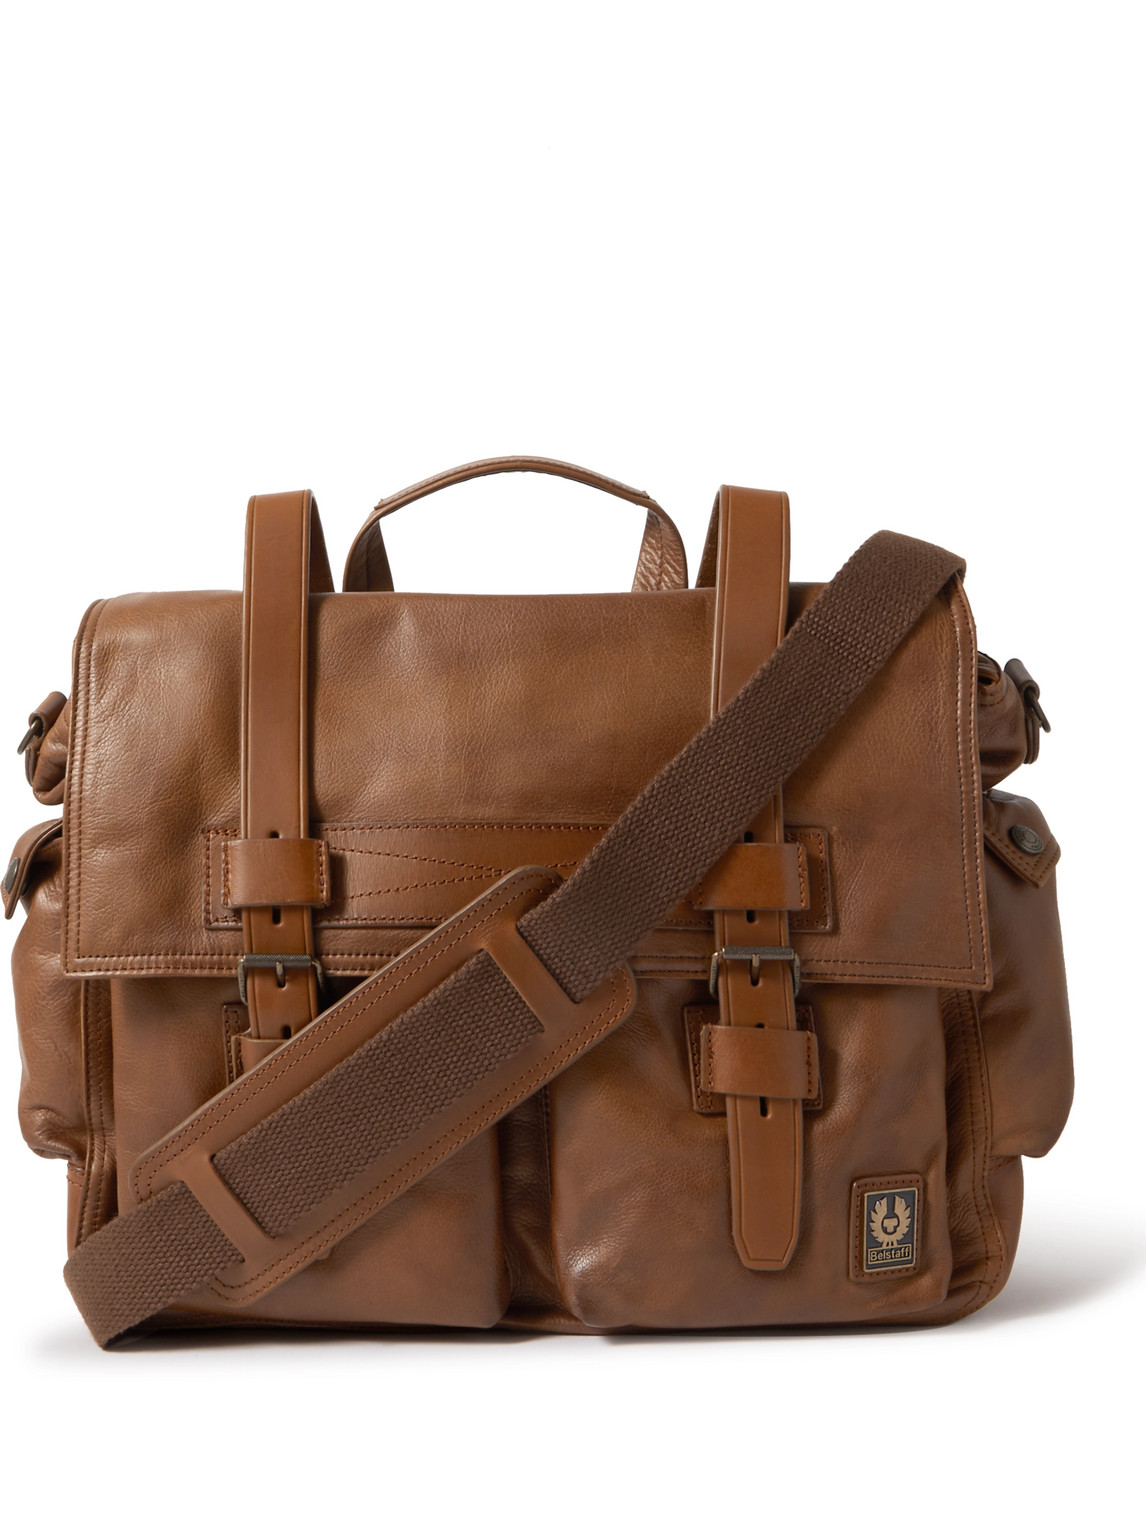 Belstaff Colonial Leather Messenger Bag In Brown | ModeSens